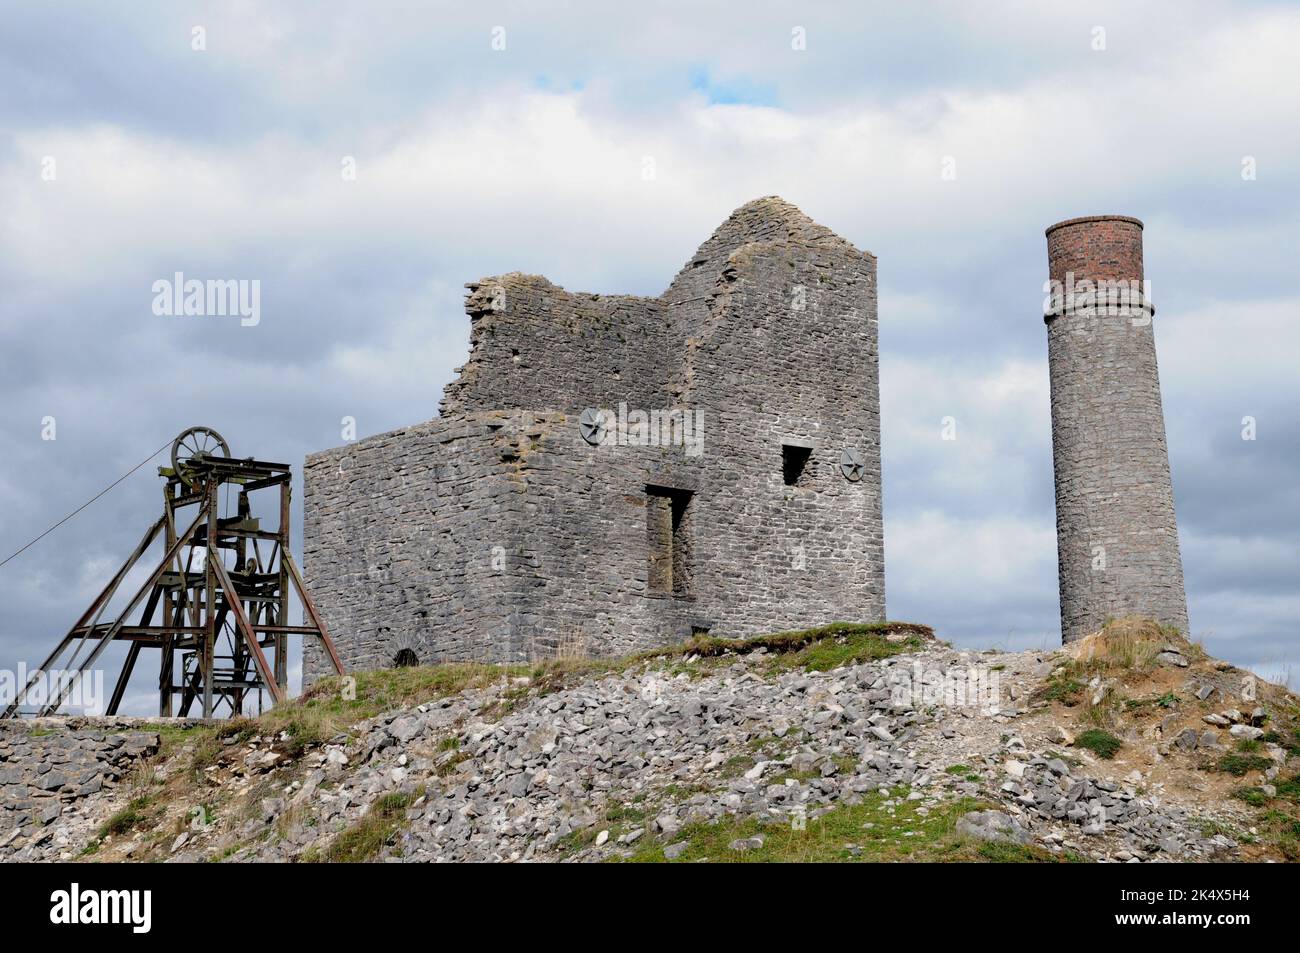 The remains of Cornish Engine House at the Magpie Mine, near Sheldon, Derbyshire. Mining took place here from 1682 until 1958 hen the Magpie closed. Stock Photo